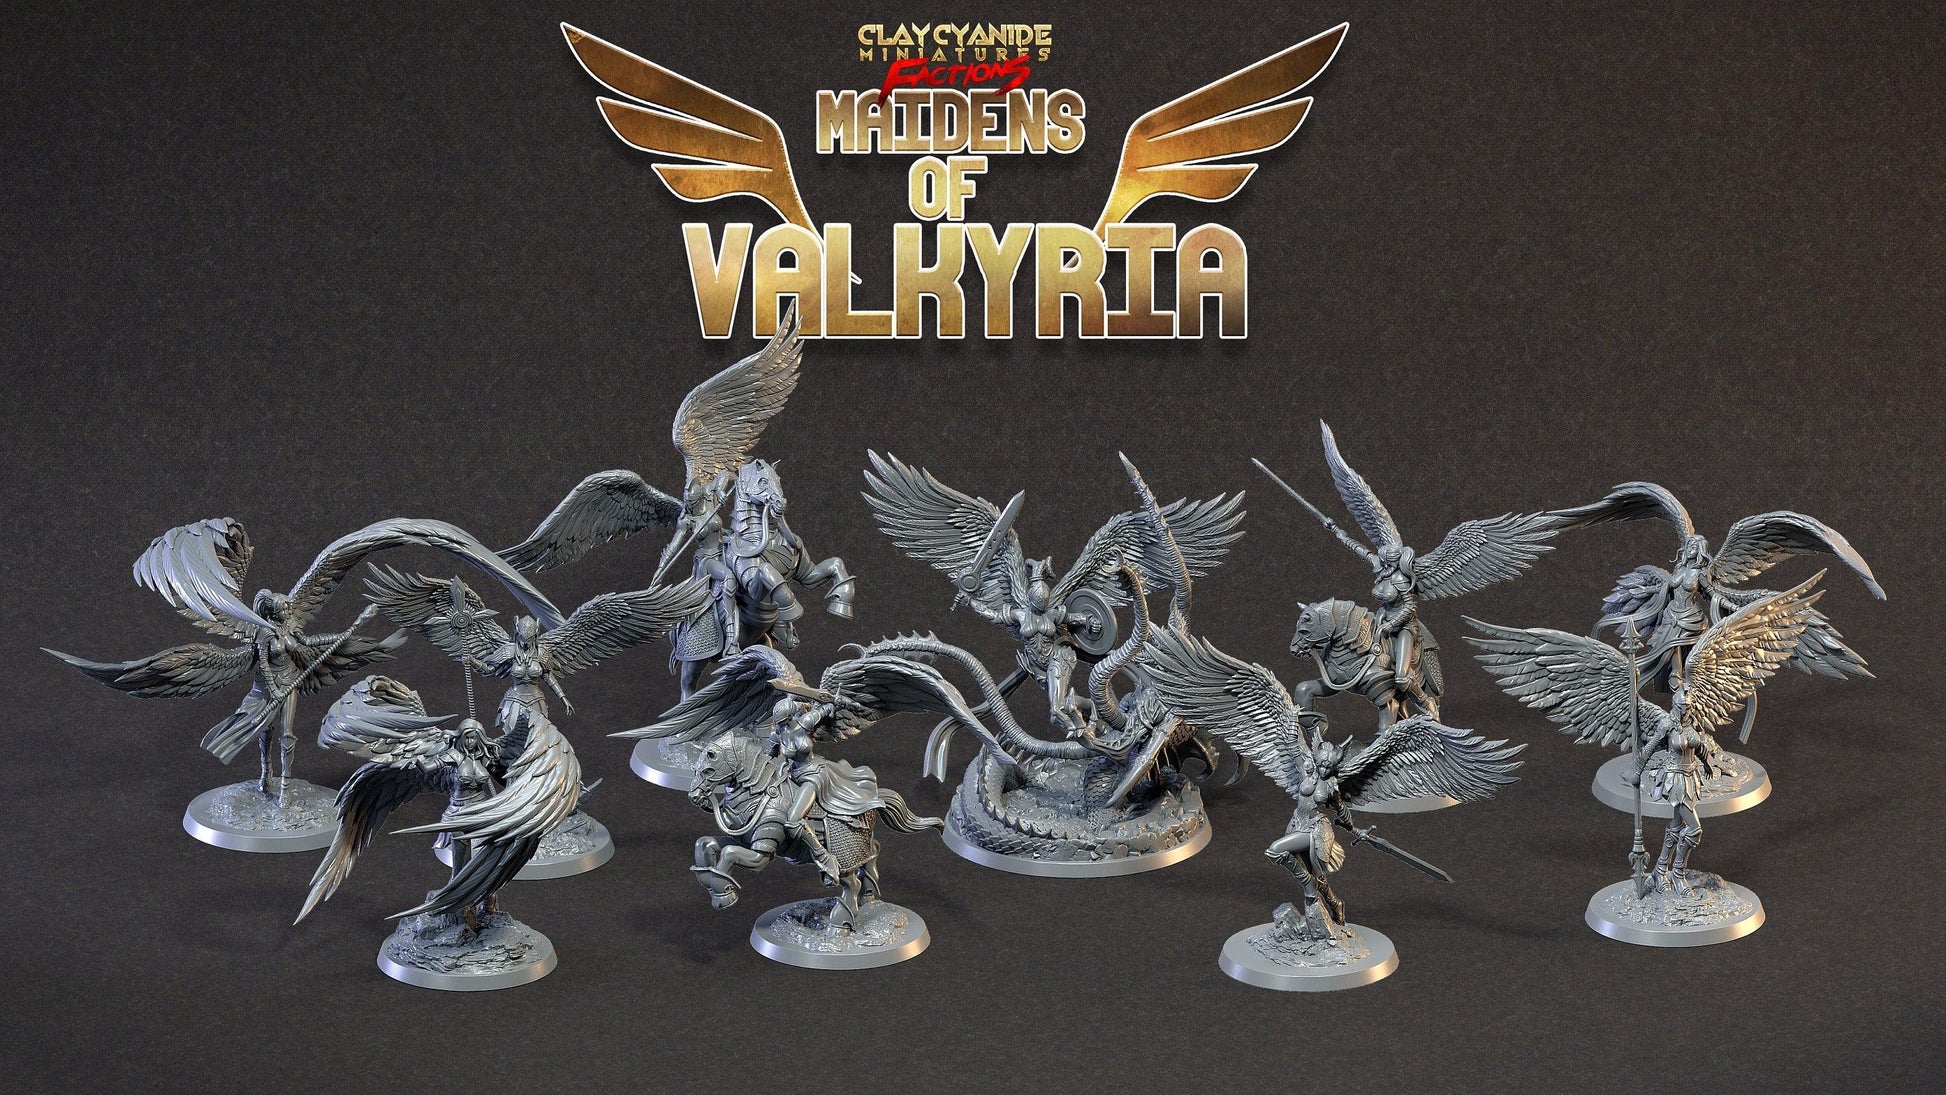 Valkyrie Viking Miniature | Hildr Clay Cyanide | Maidens of Valkyria | Tabletop Gaming | DnD Miniature | Dungeons and Dragons - Plague Miniatures shop for DnD Miniatures